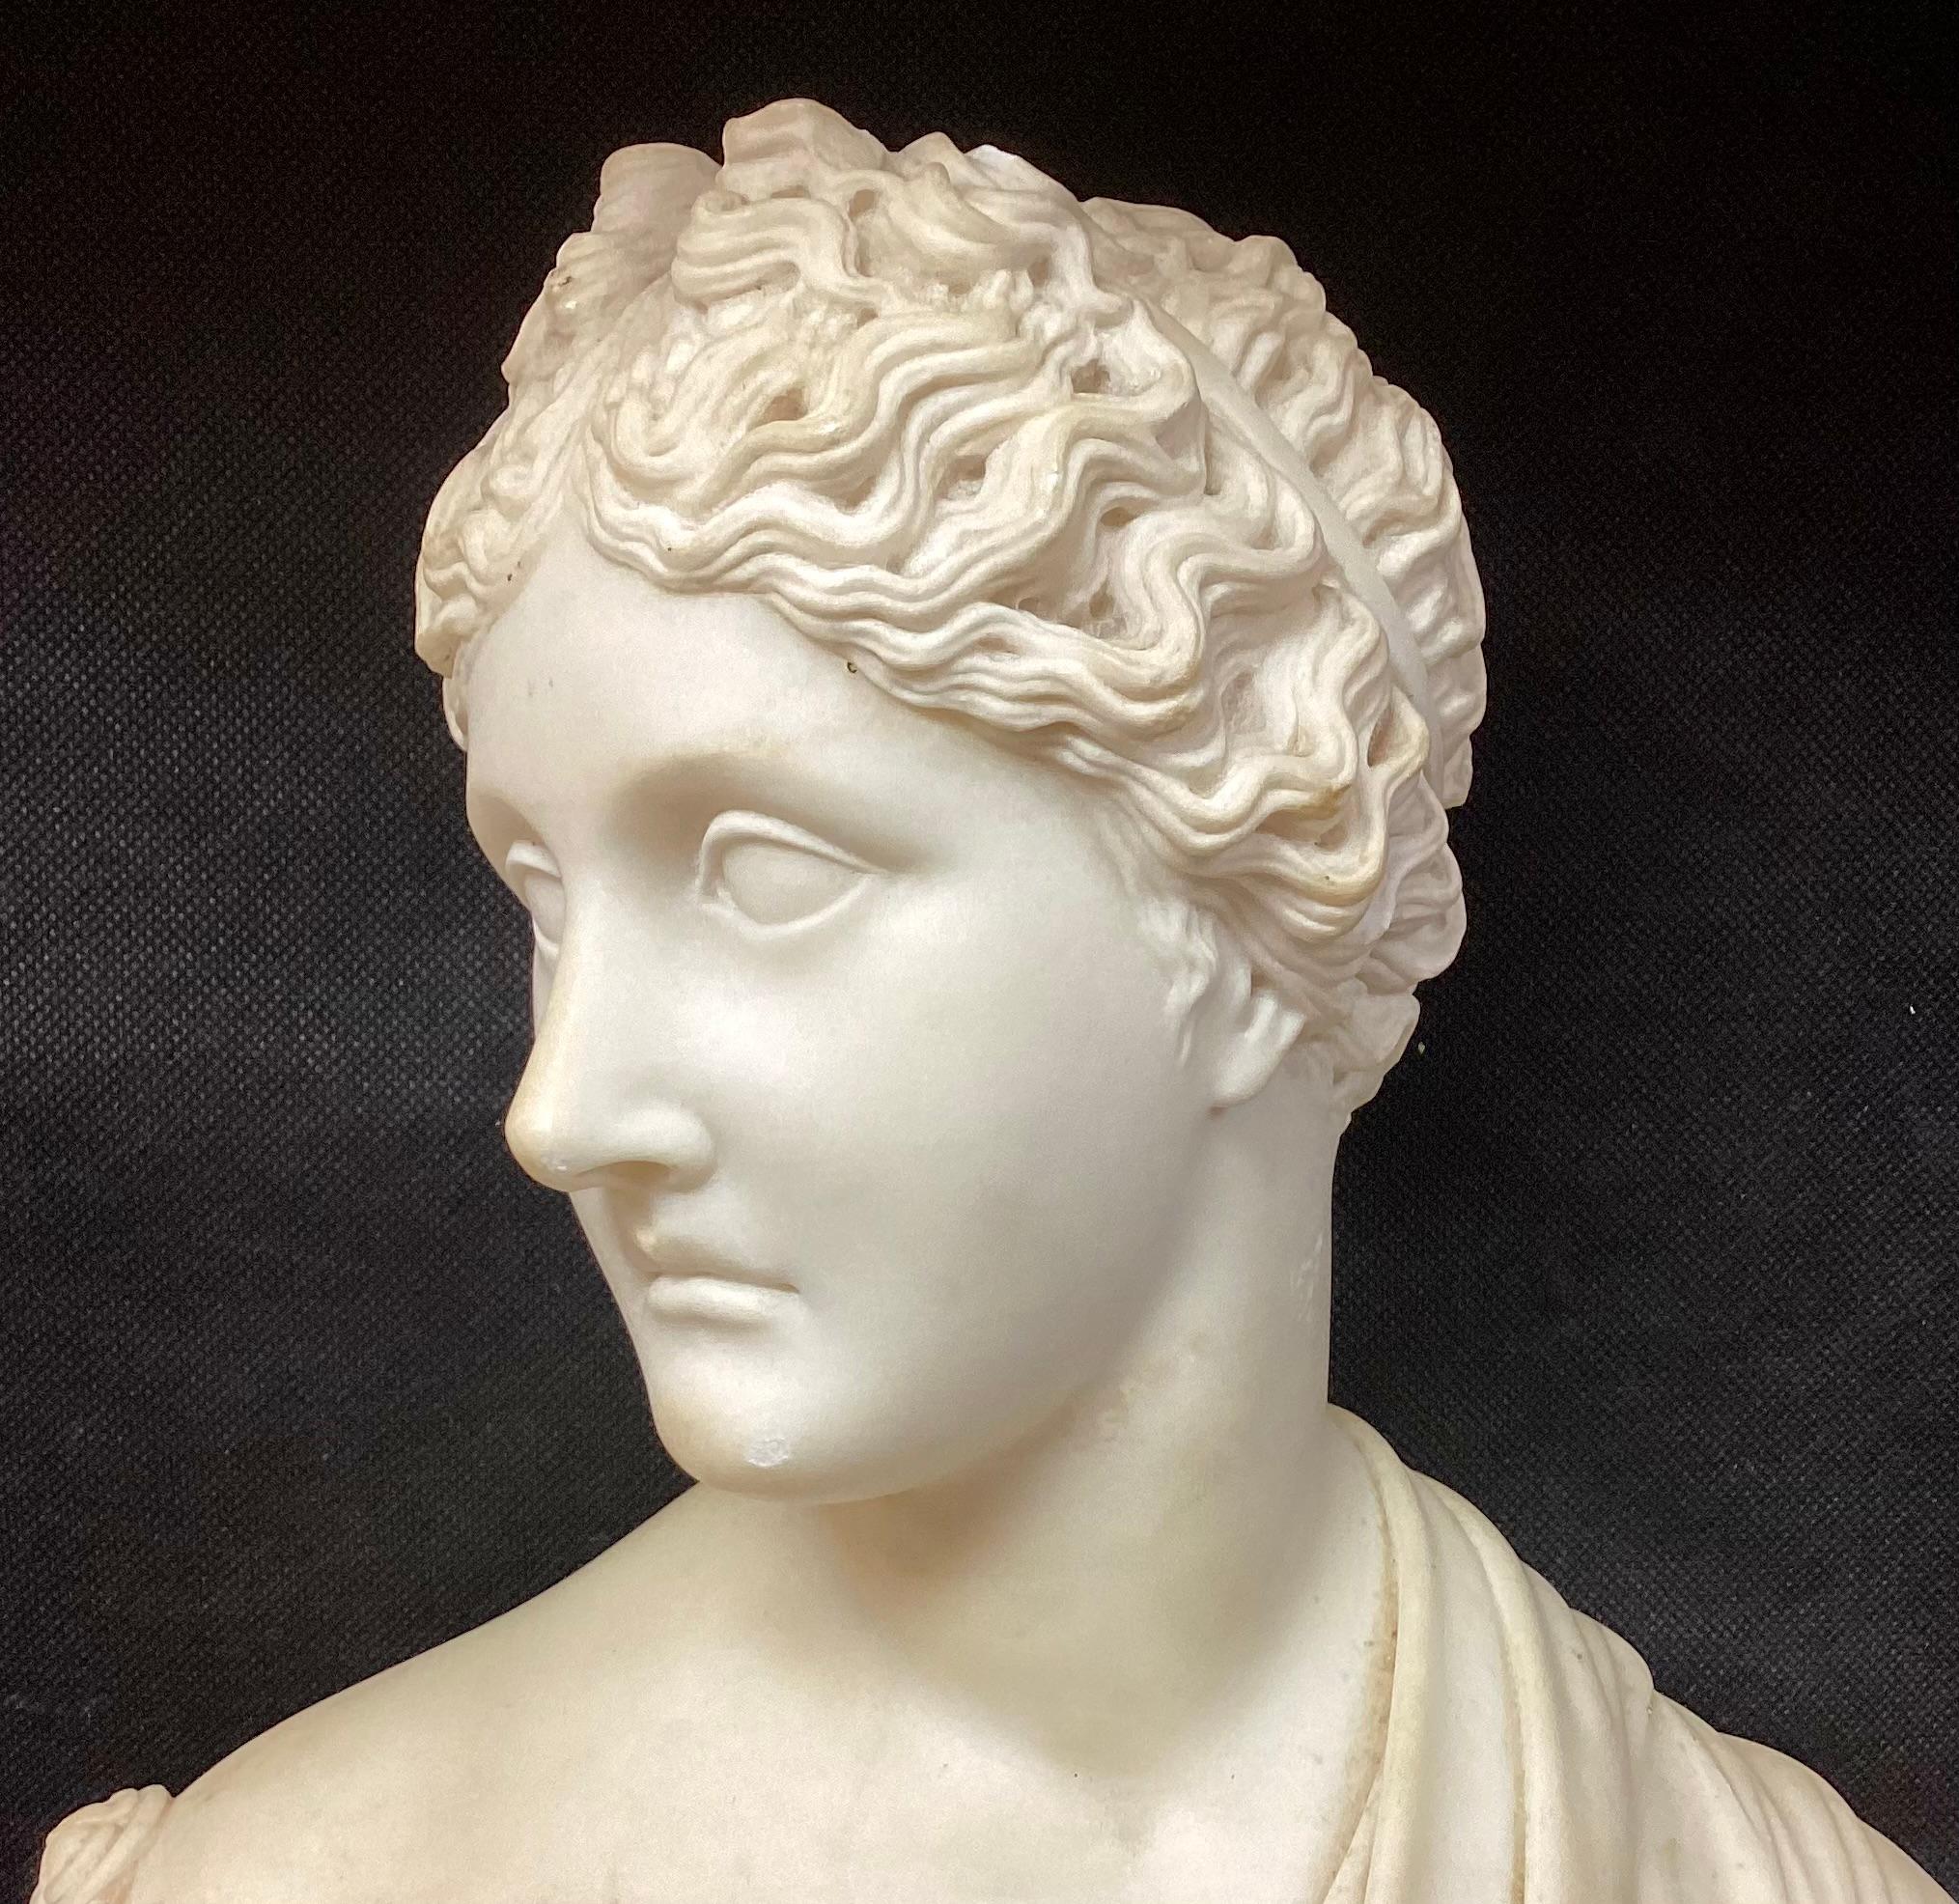 Classical 19th century hand-carved Italian Neoclassic Grand Tour marble female bust. Bust features intricately carved young woman's head and neck, wearing delicate drapery across décolleté. Her facial expression is depicted in extraordinary detail. 